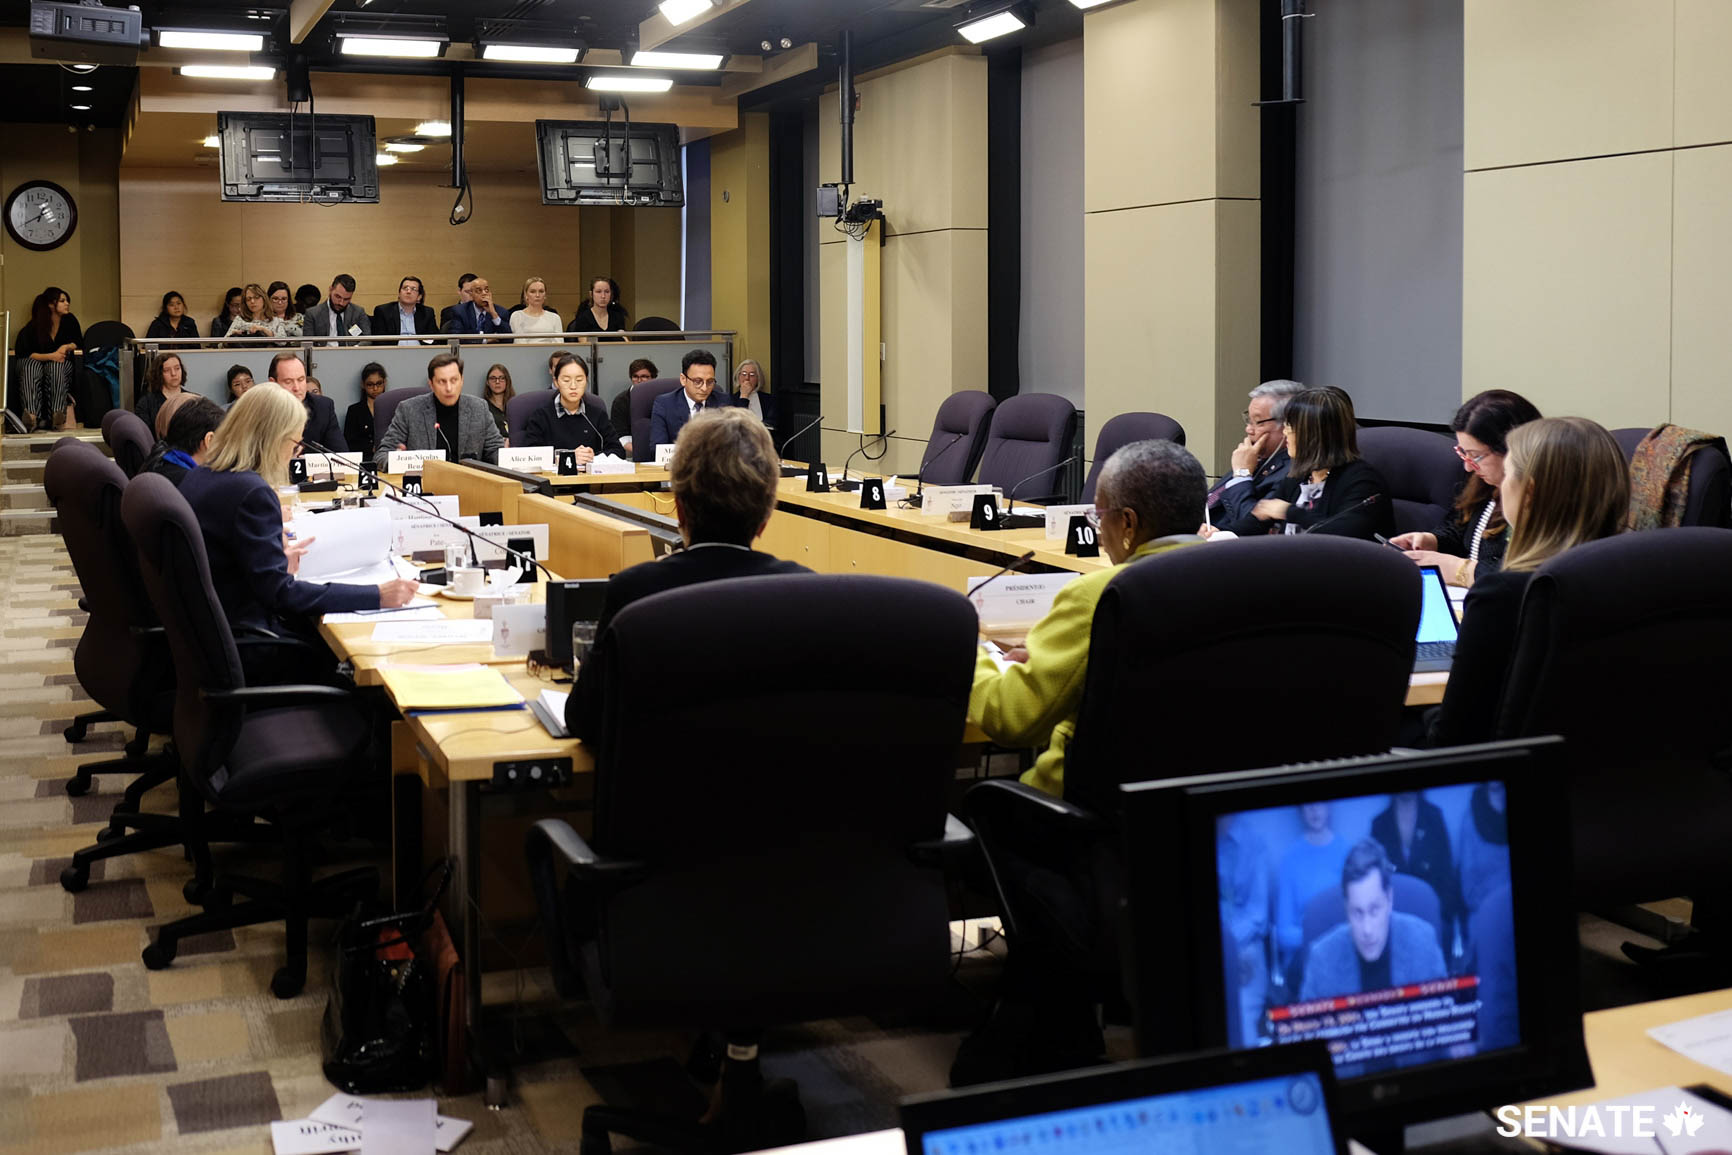 Senators from the Committee on Human Rights listen to witness testimony on Canada’s international and national human rights obligations during a committee meeting on December 5, 2018.